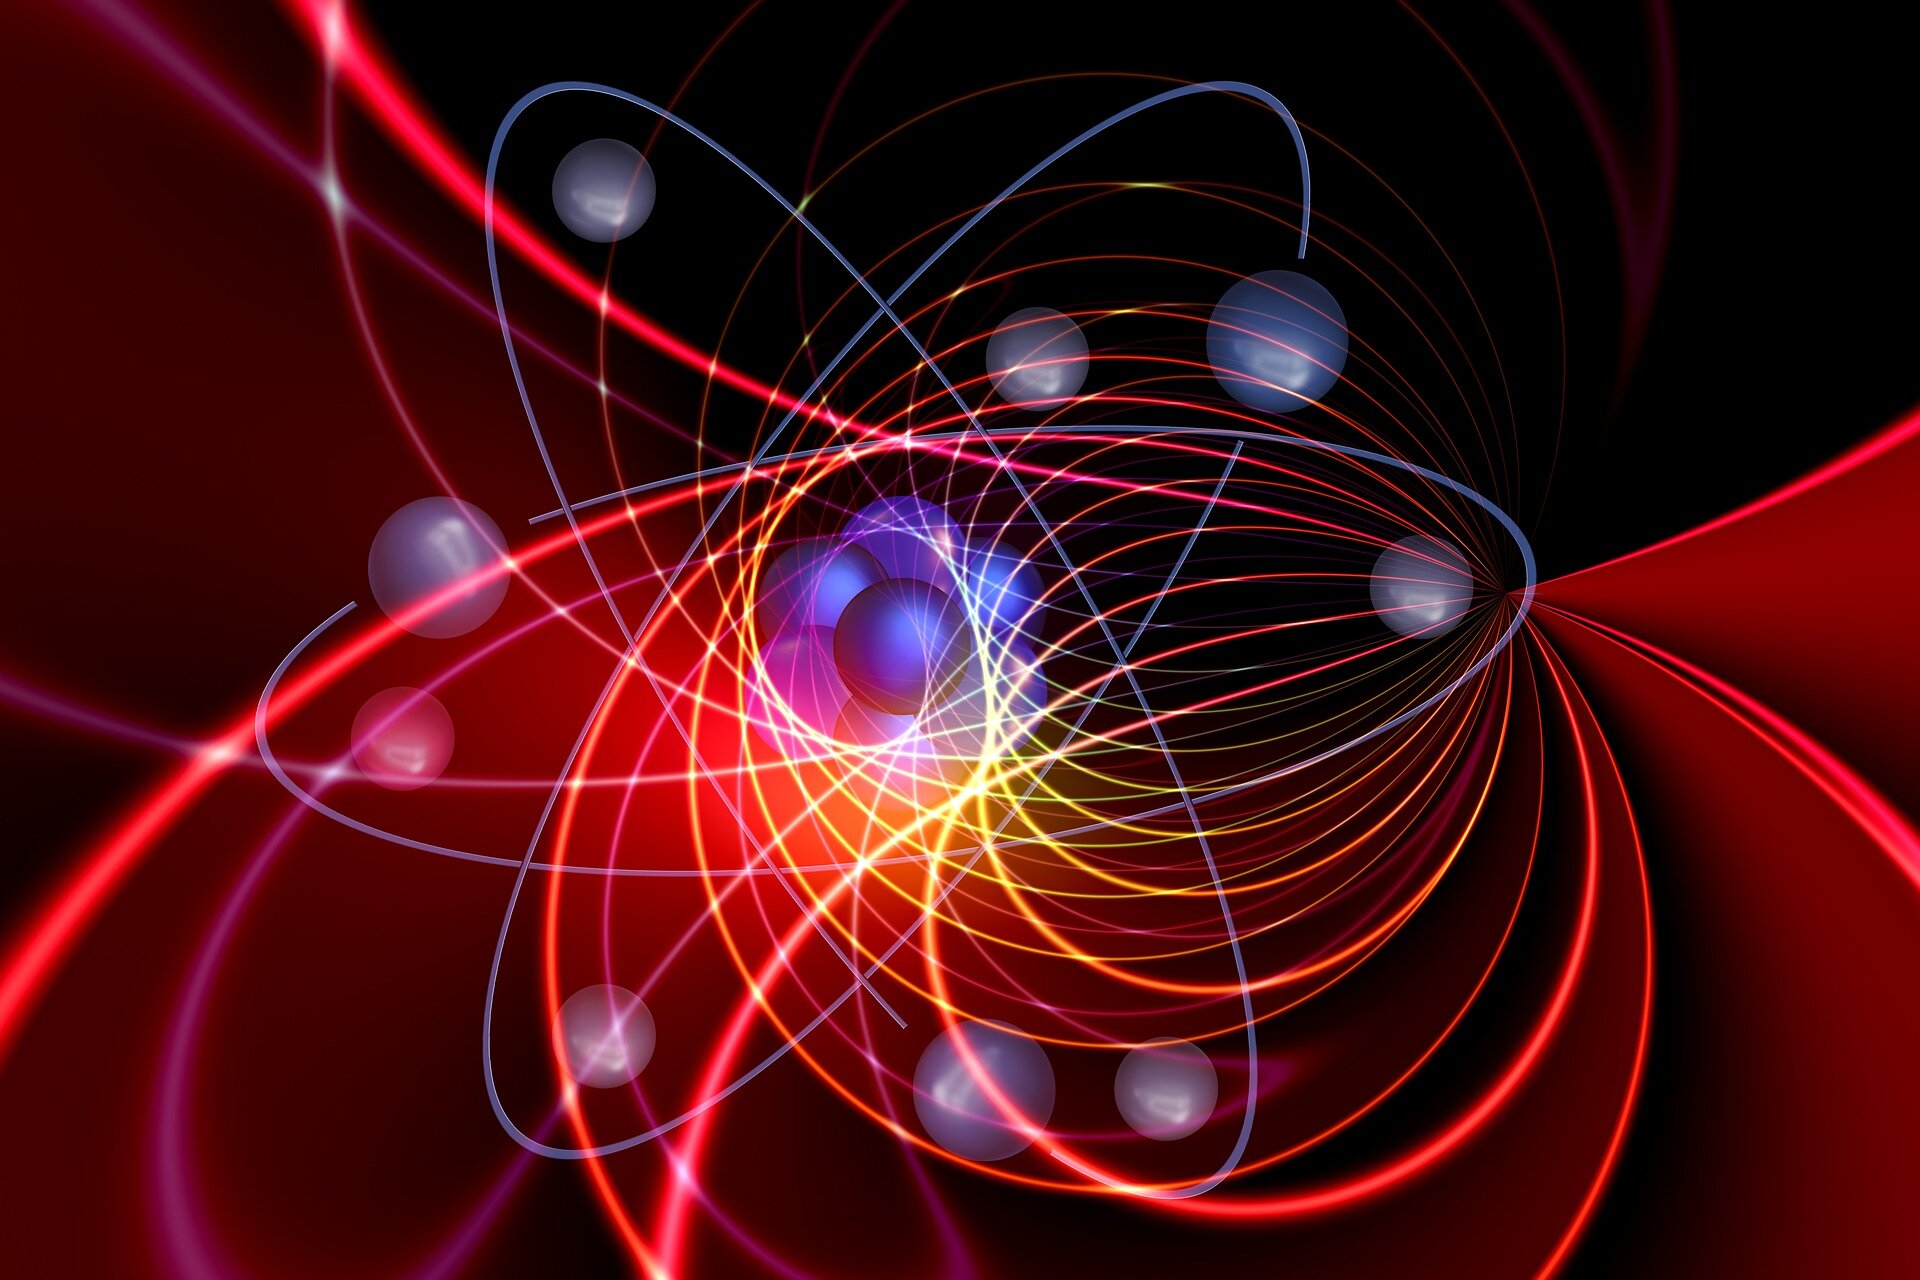 Physicists see electron whirlpools for the first time